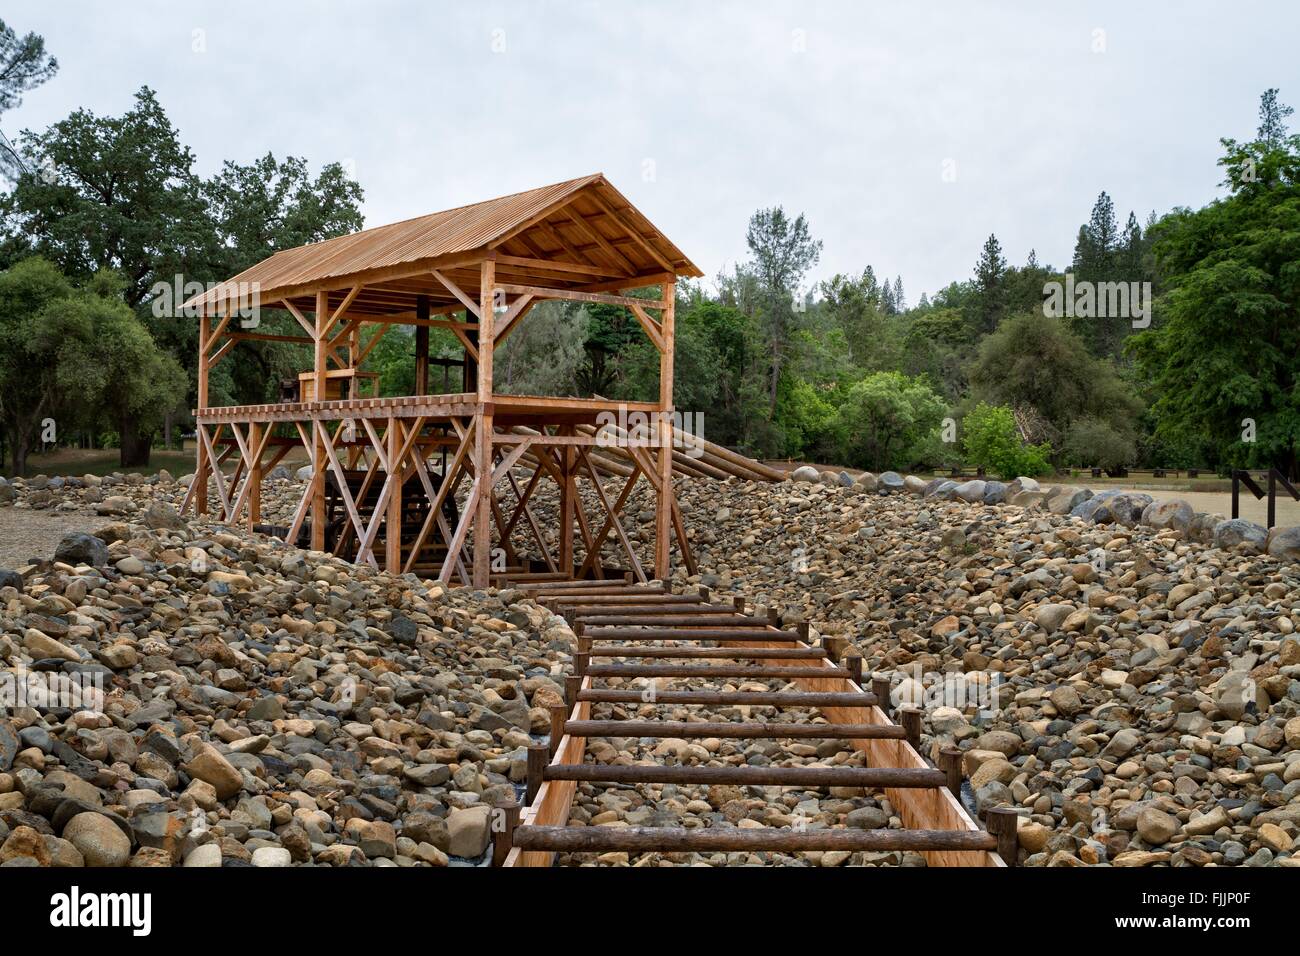 Sutters Mühle Replica gebaut im Jahr 2015. Marshall Gold Discovery State Historic Park, Coloma, Kalifornien. Stockfoto